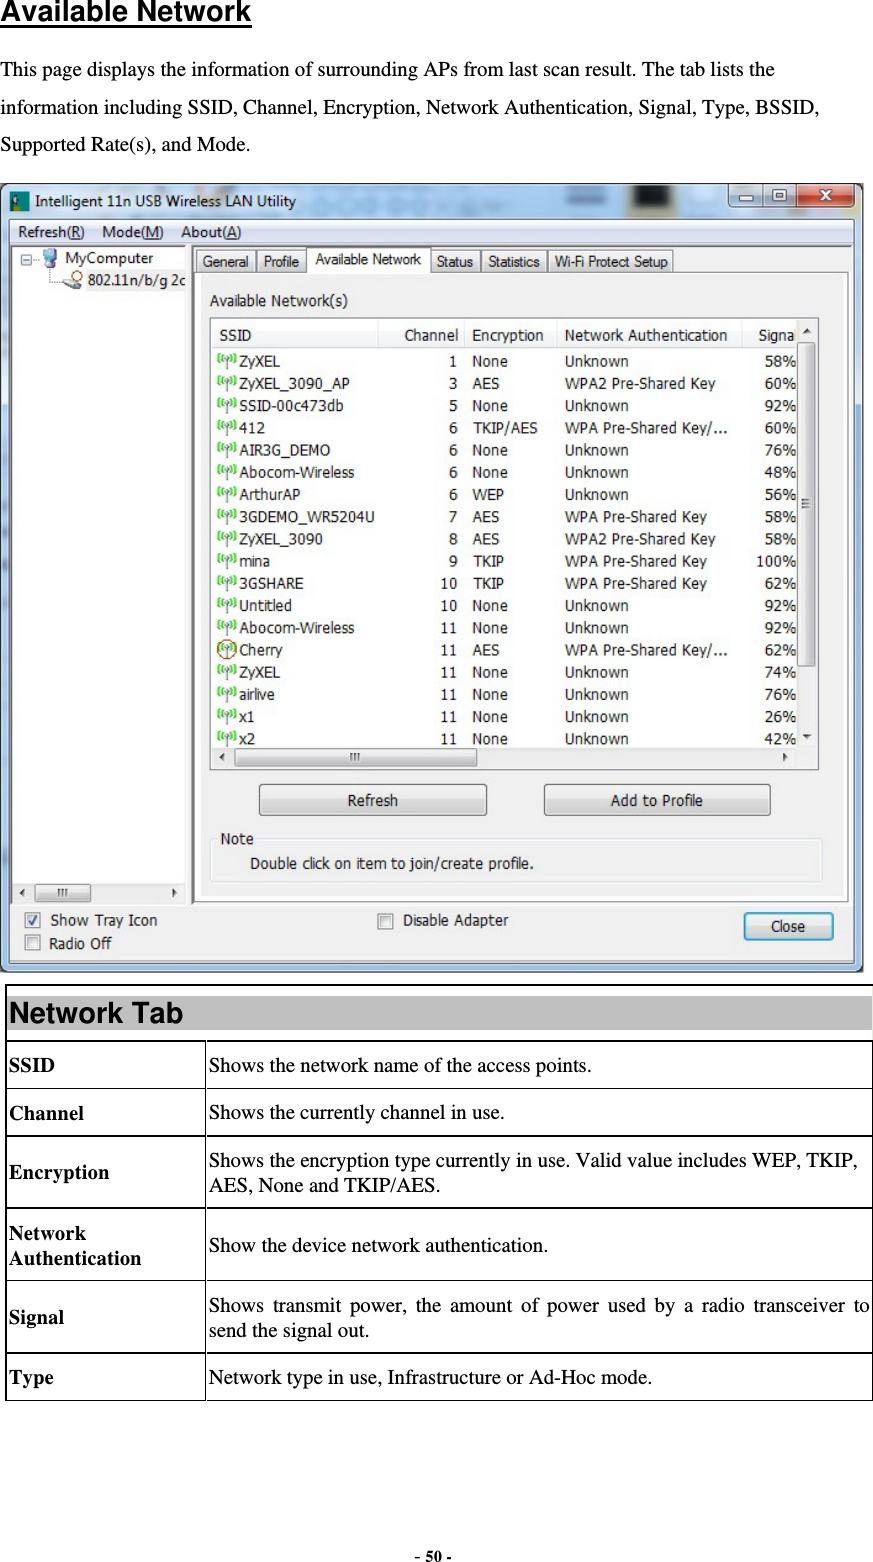  - 50 - Available Network This page displays the information of surrounding APs from last scan result. The tab lists the information including SSID, Channel, Encryption, Network Authentication, Signal, Type, BSSID, Supported Rate(s), and Mode.  Network Tab SSID  Shows the network name of the access points. Channel  Shows the currently channel in use. Encryption  Shows the encryption type currently in use. Valid value includes WEP, TKIP, AES, None and TKIP/AES. Network Authentication  Show the device network authentication. Signal  Shows transmit power, the amount of power used by a radio transceiver to send the signal out. Type Network type in use, Infrastructure or Ad-Hoc mode. 